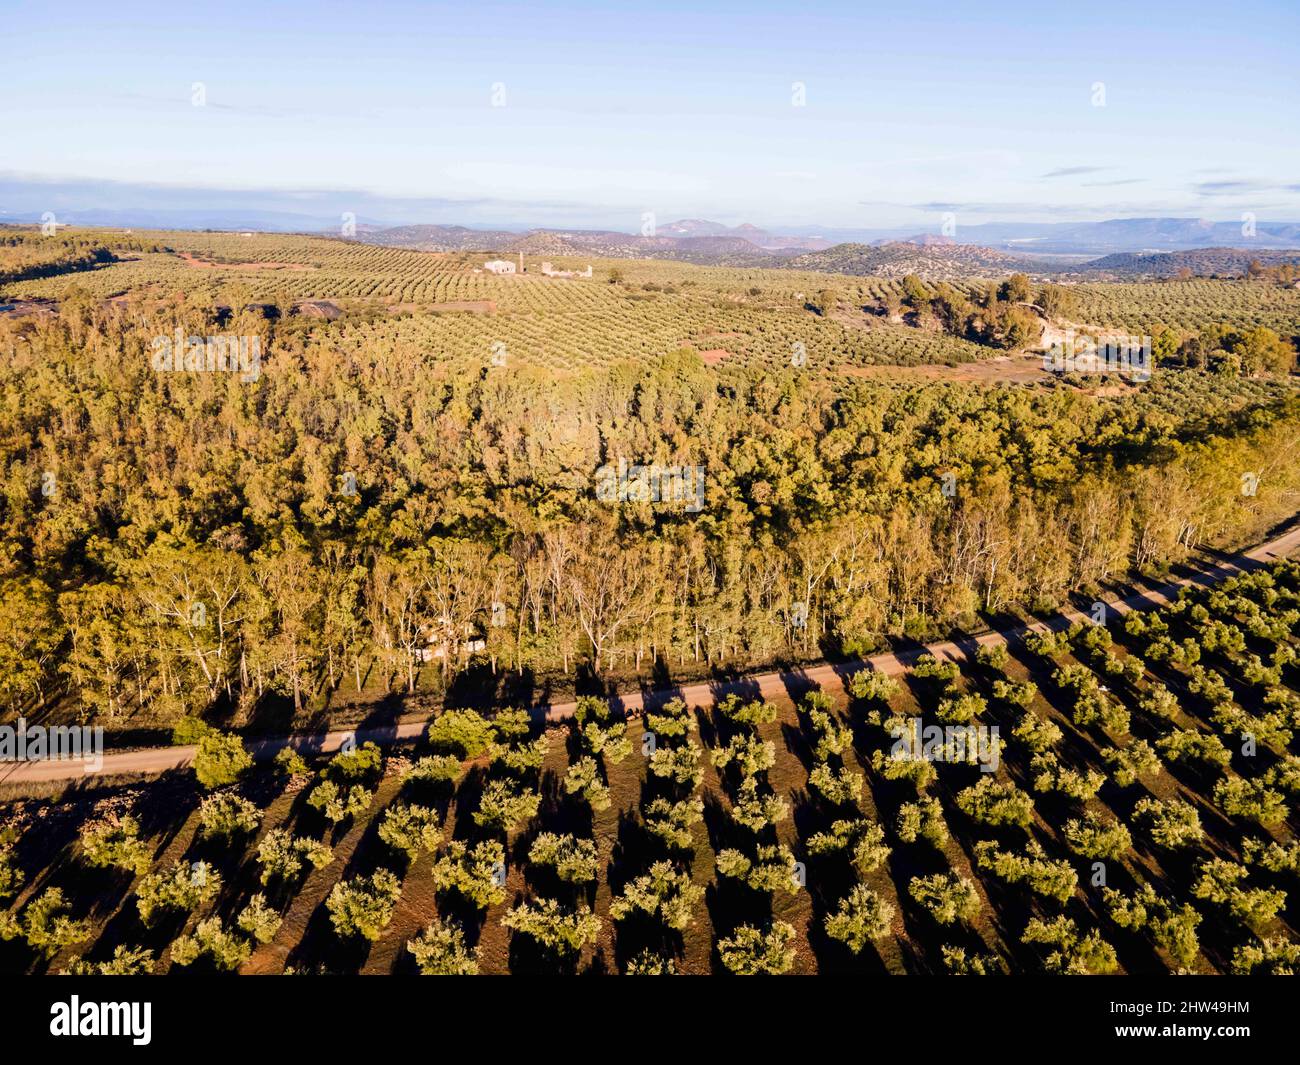 Andalusian olive groves in Jaen, home to 37.6% of the total olive-growing land in Andalusia, Spain, the country's biggest producers and the world's le Stock Photo